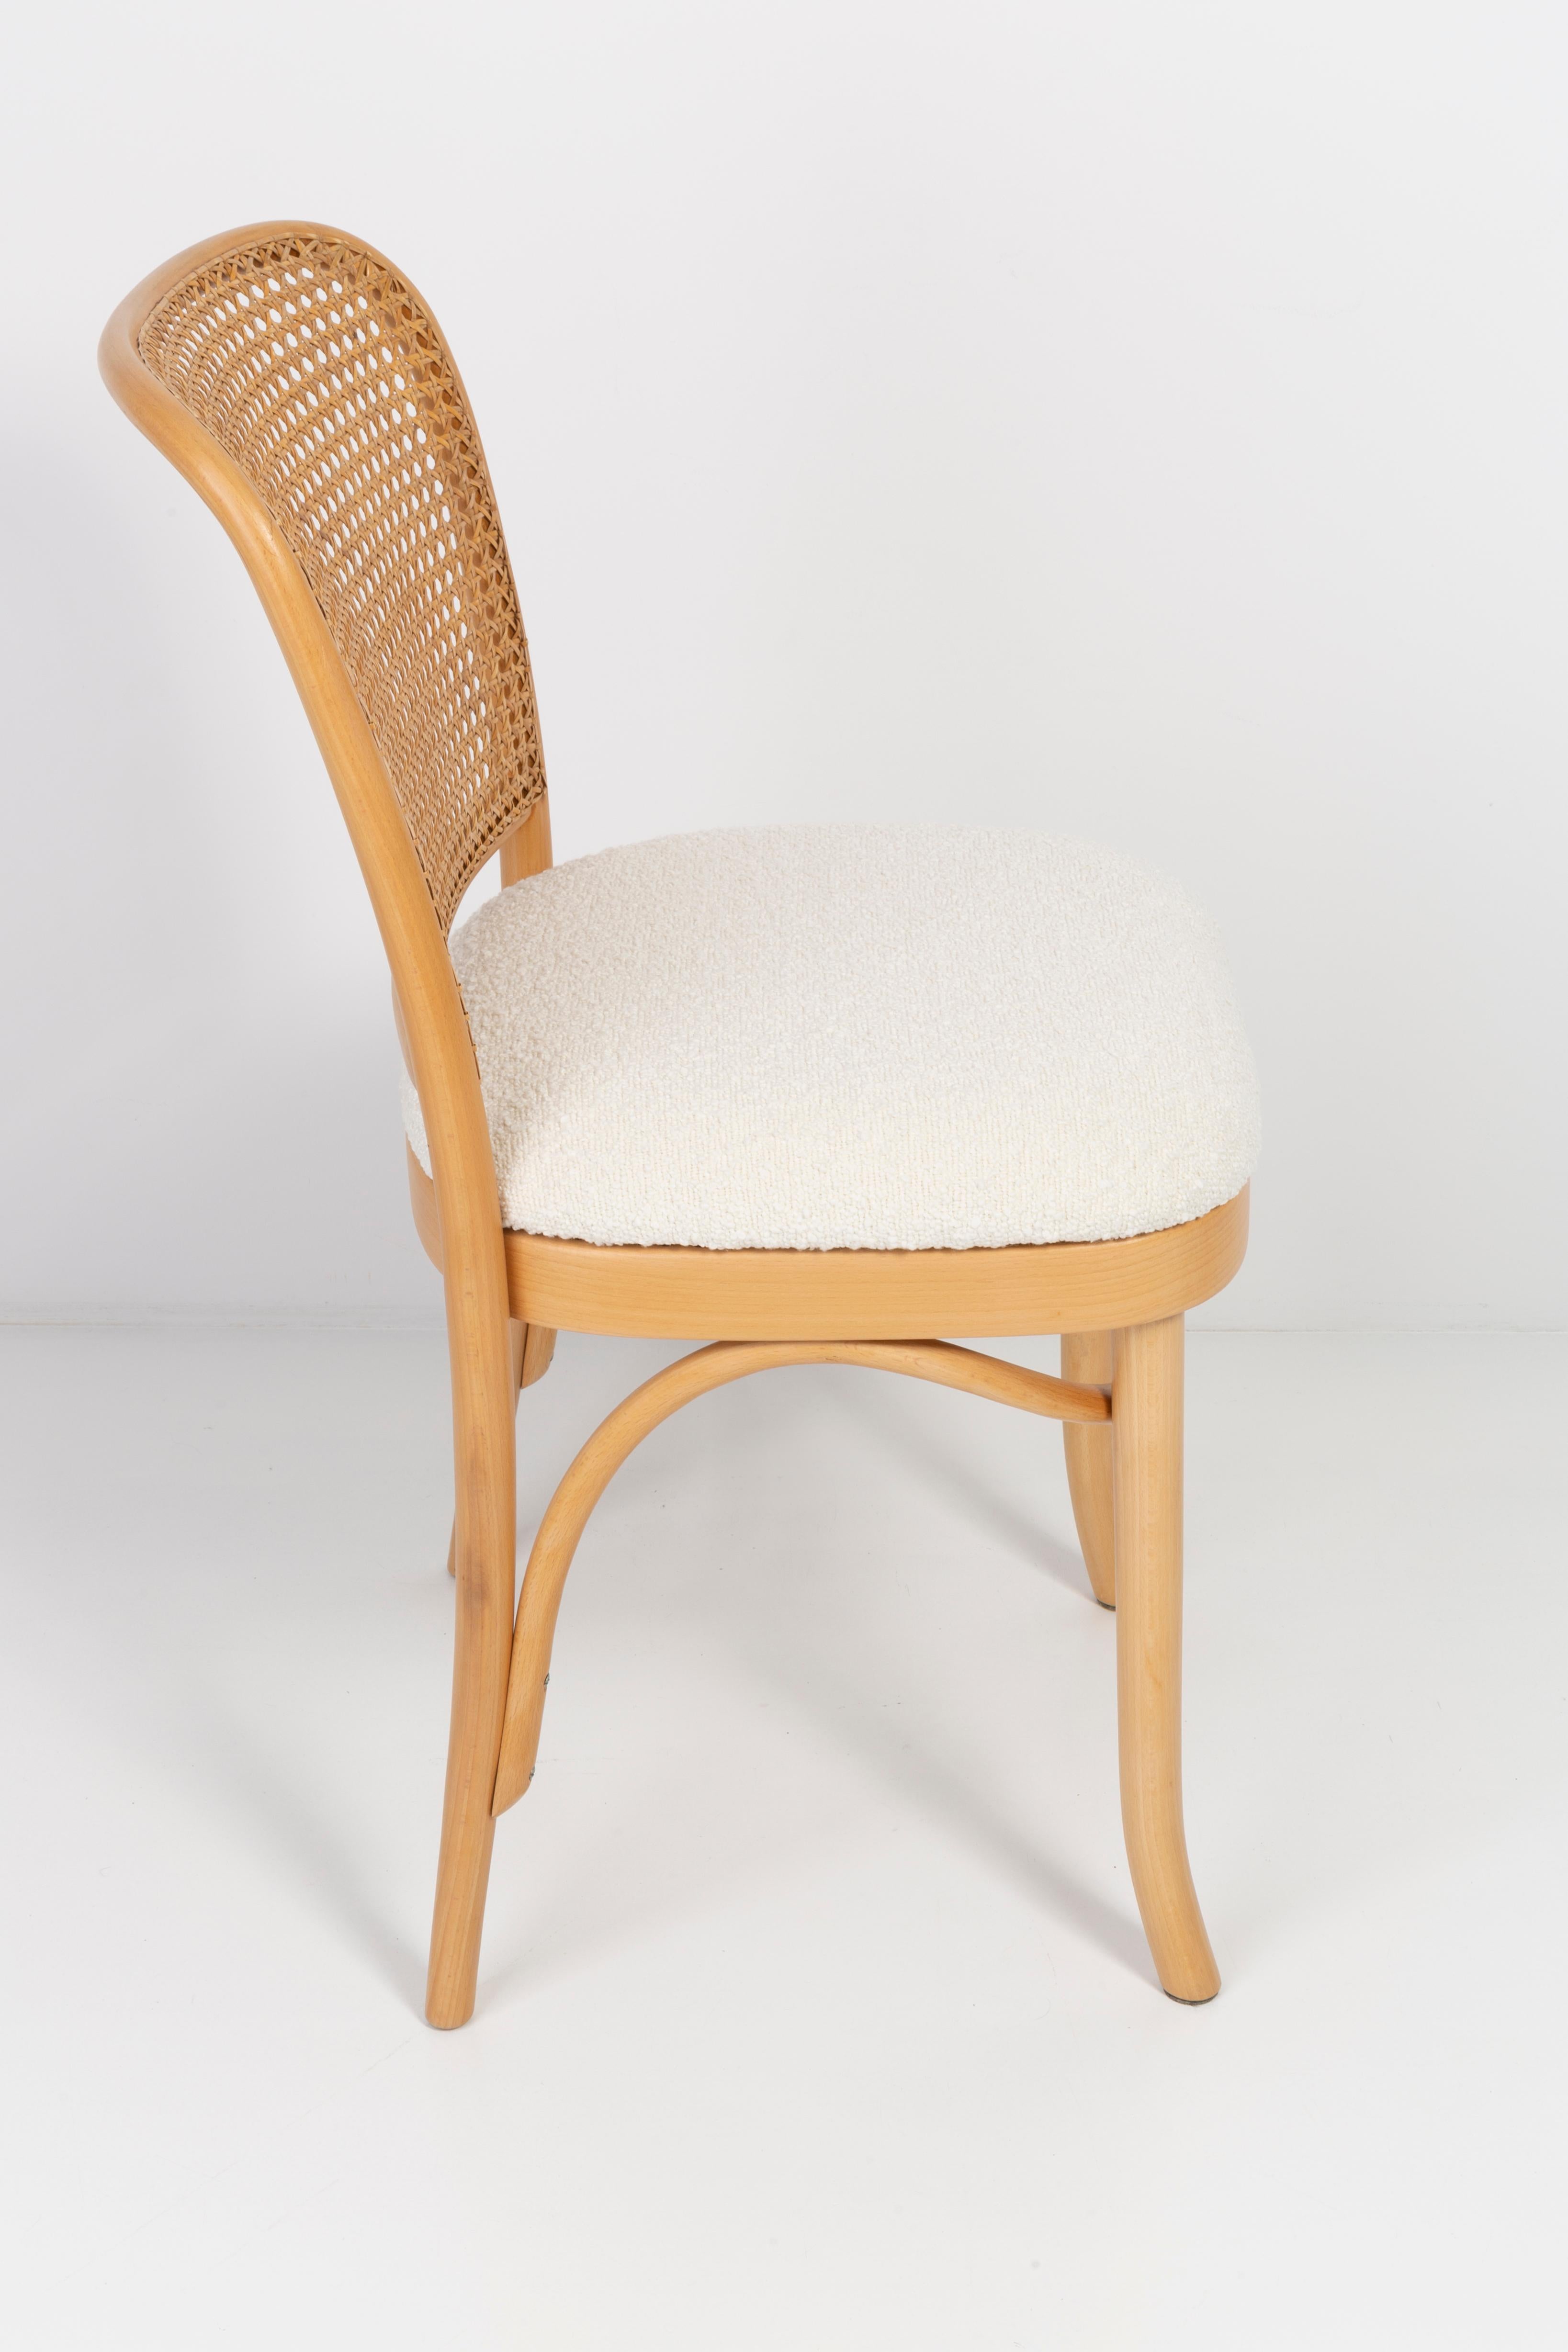 Set of Eight White Boucle Thonet Wood Rattan Chairs, 1960s For Sale 4